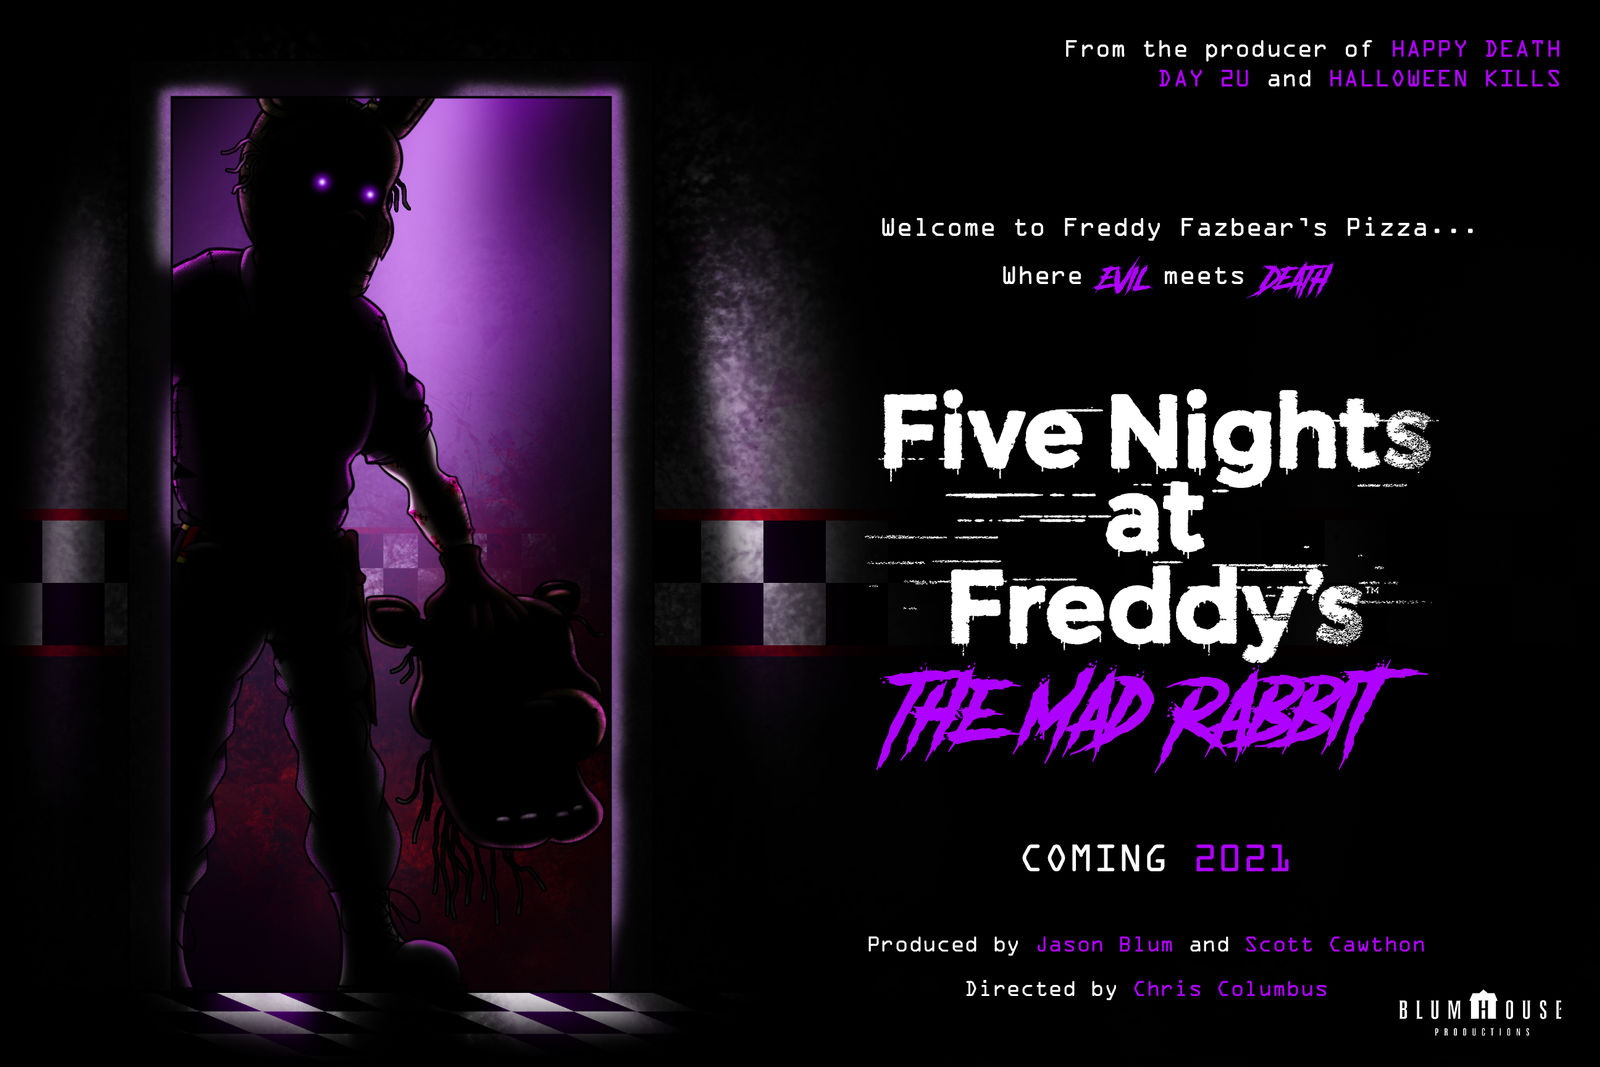 The Mad Rabbit celebrate FNaF 6 year anniversary by Playstation